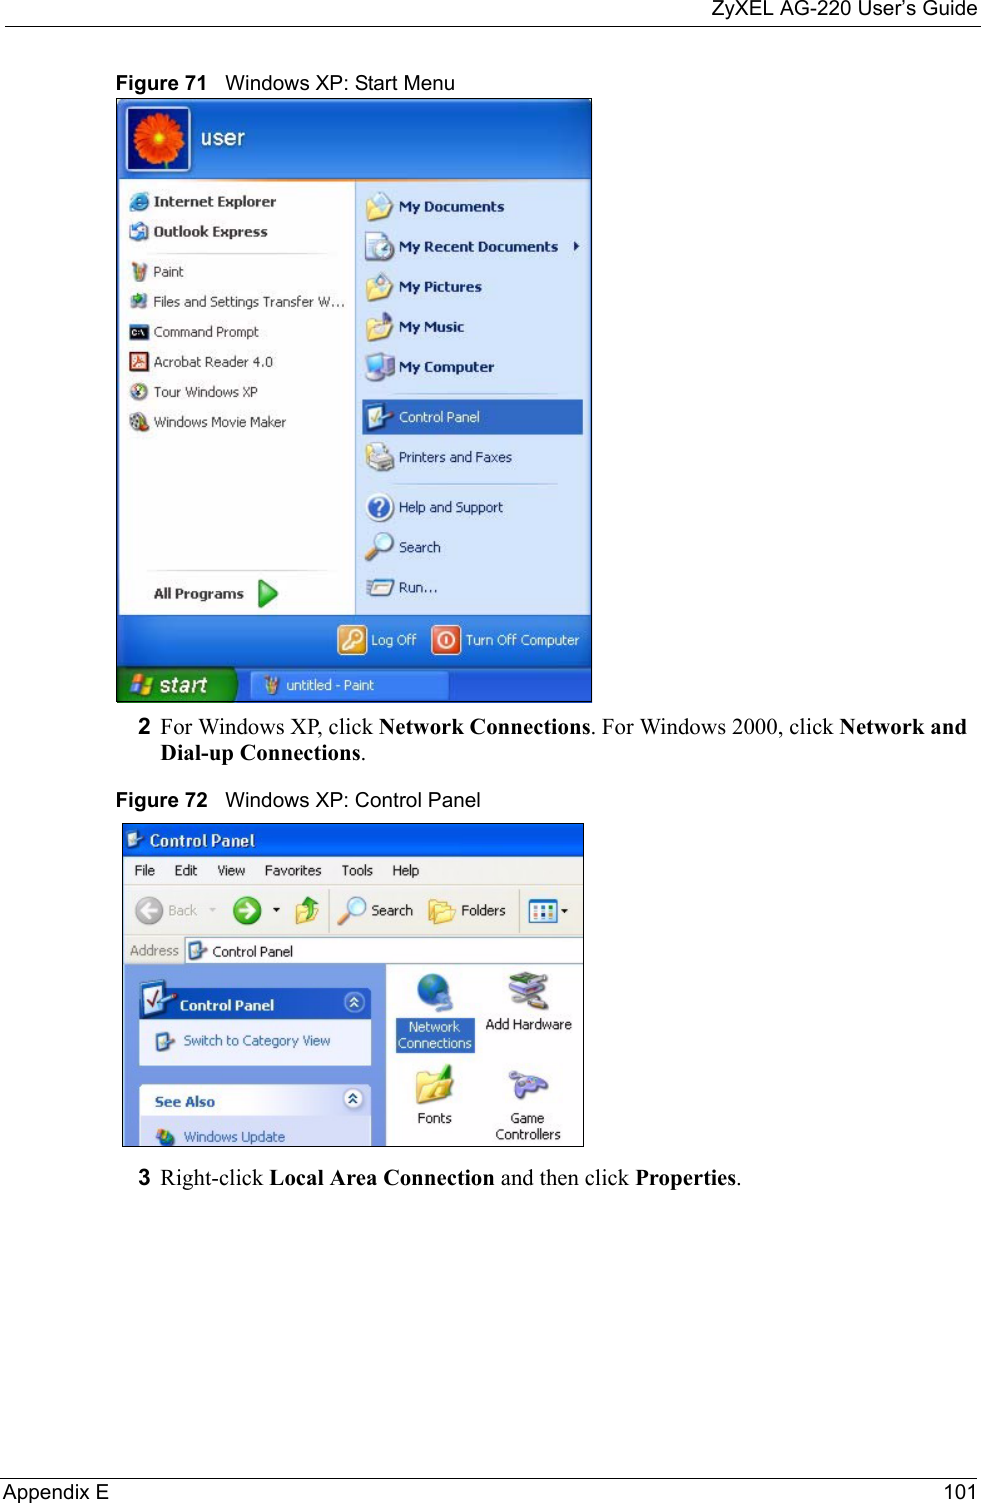 ZyXEL AG-220 User’s GuideAppendix E 101Figure 71   Windows XP: Start Menu2For Windows XP, click Network Connections. For Windows 2000, click Network and Dial-up Connections.Figure 72   Windows XP: Control Panel3Right-click Local Area Connection and then click Properties.